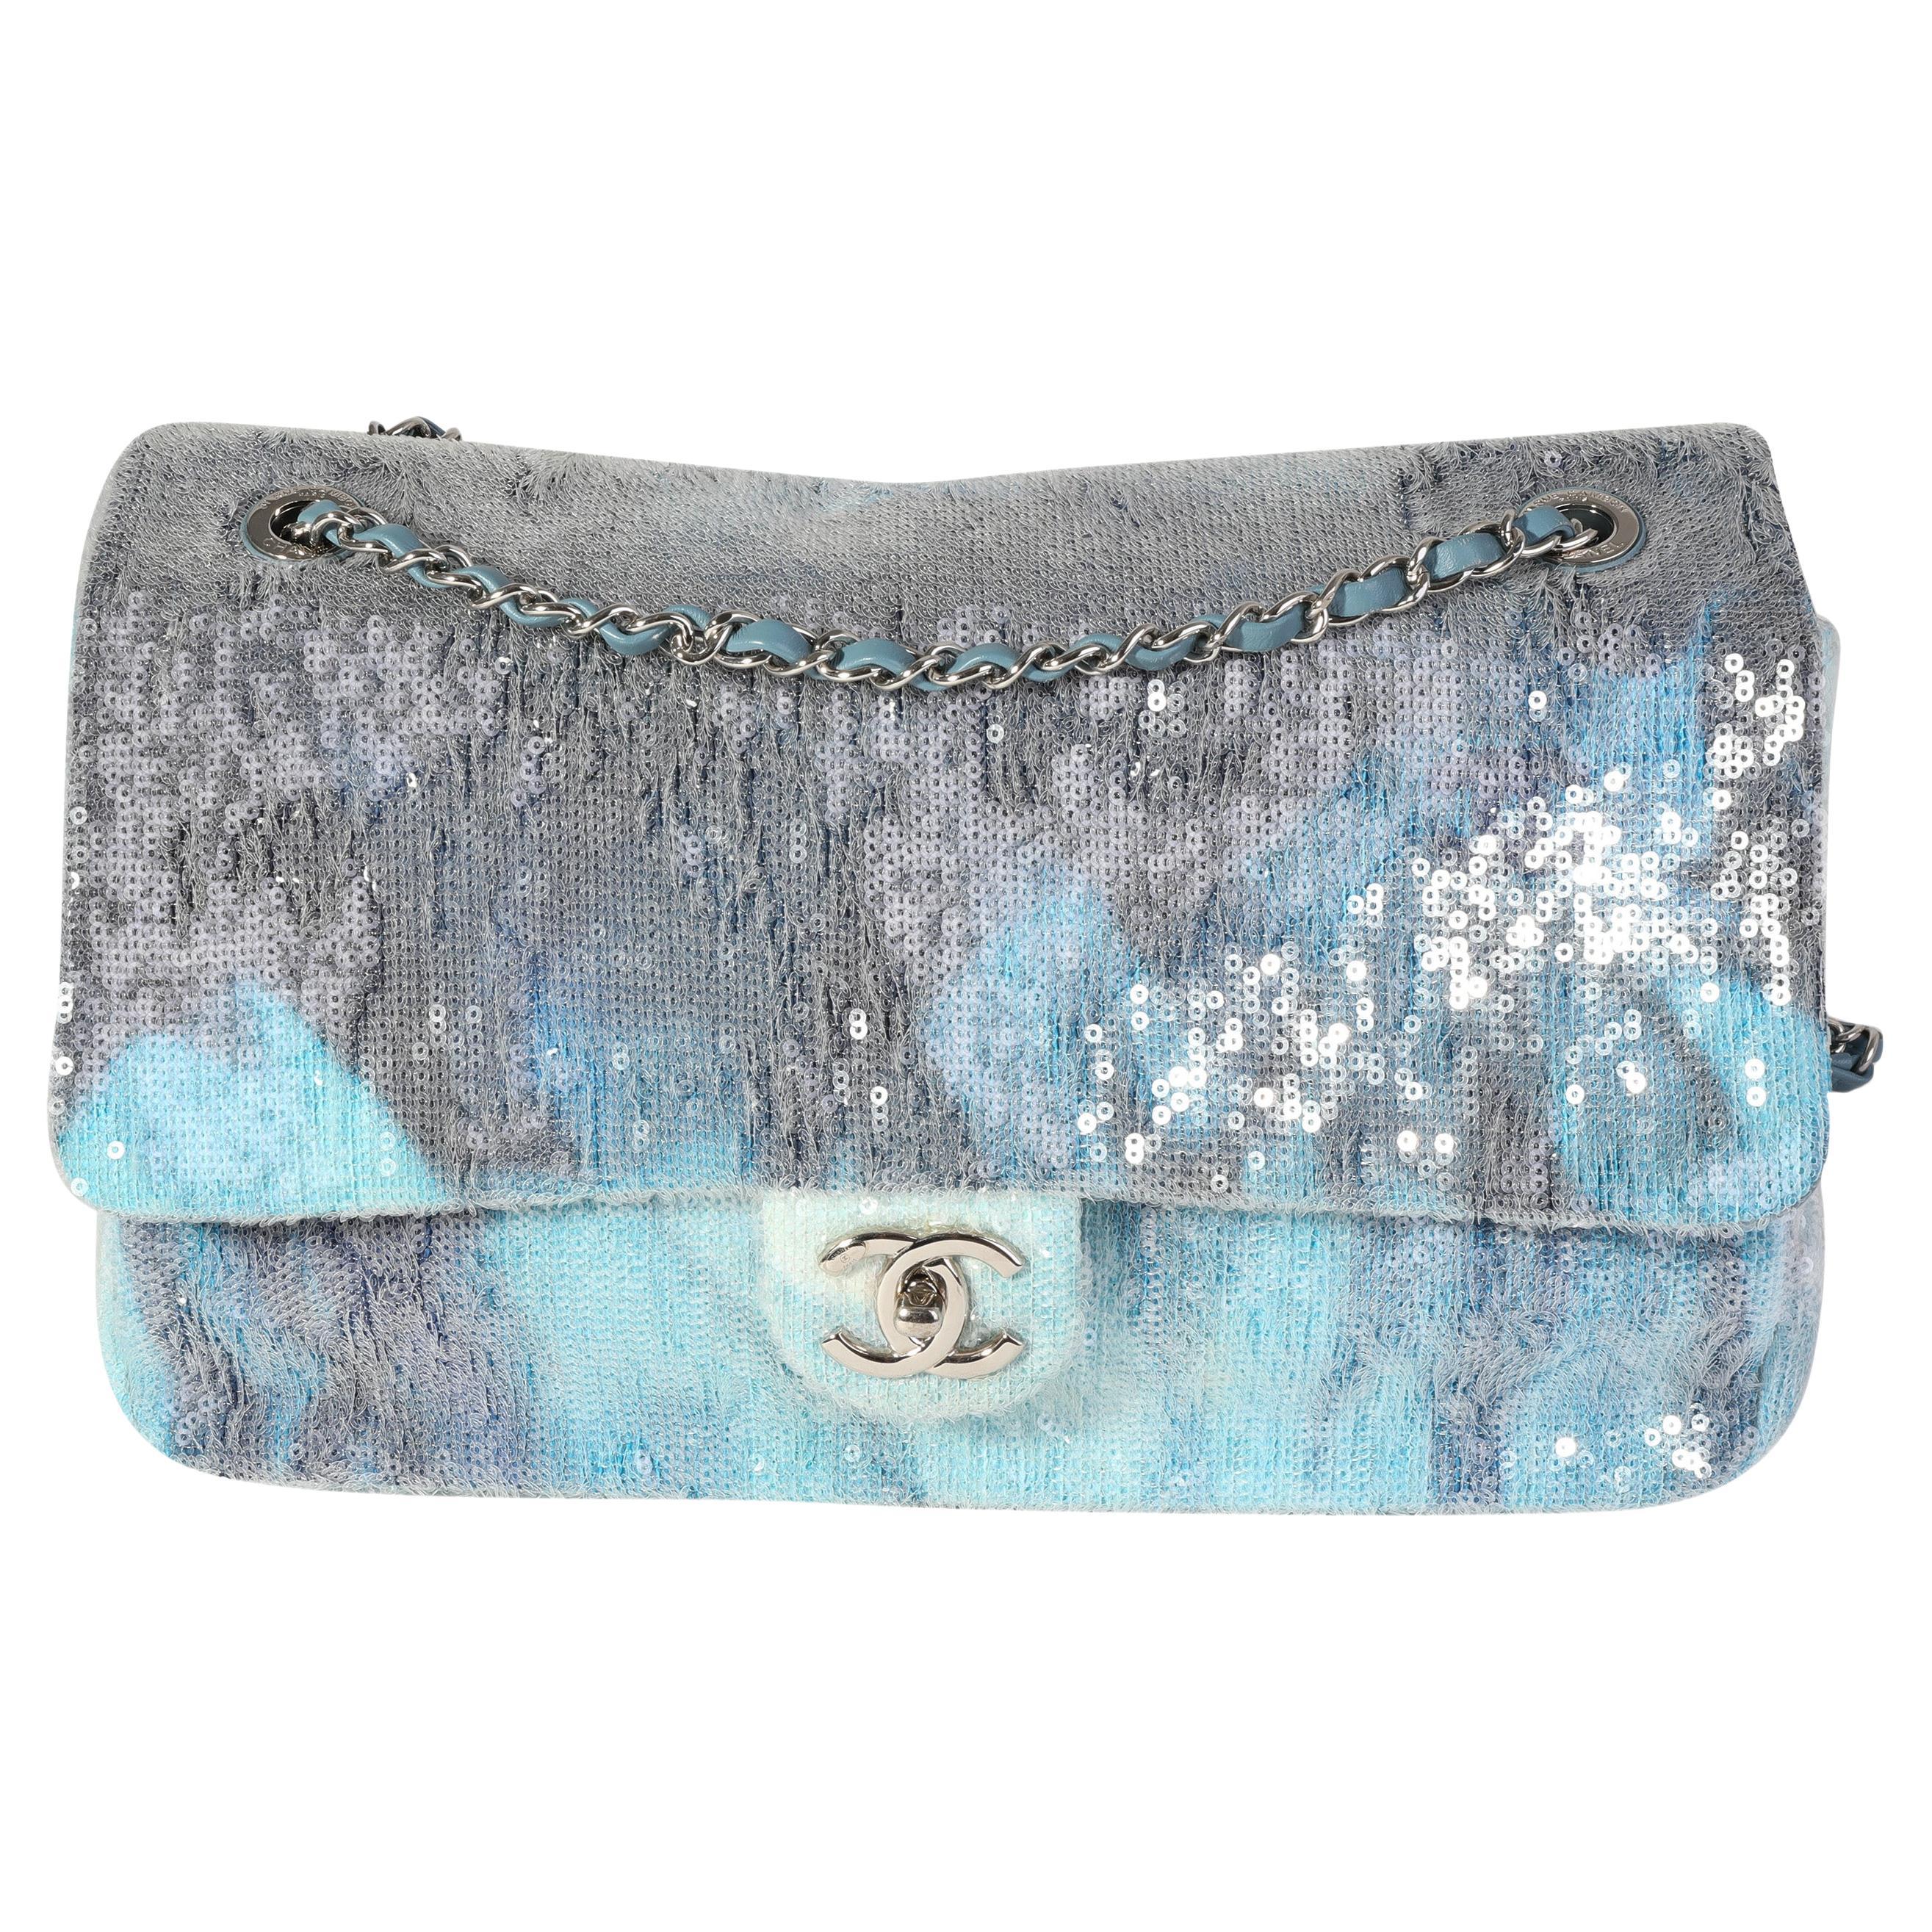 Chanel Blue Sequin Large Waterfall Single Flap Bag